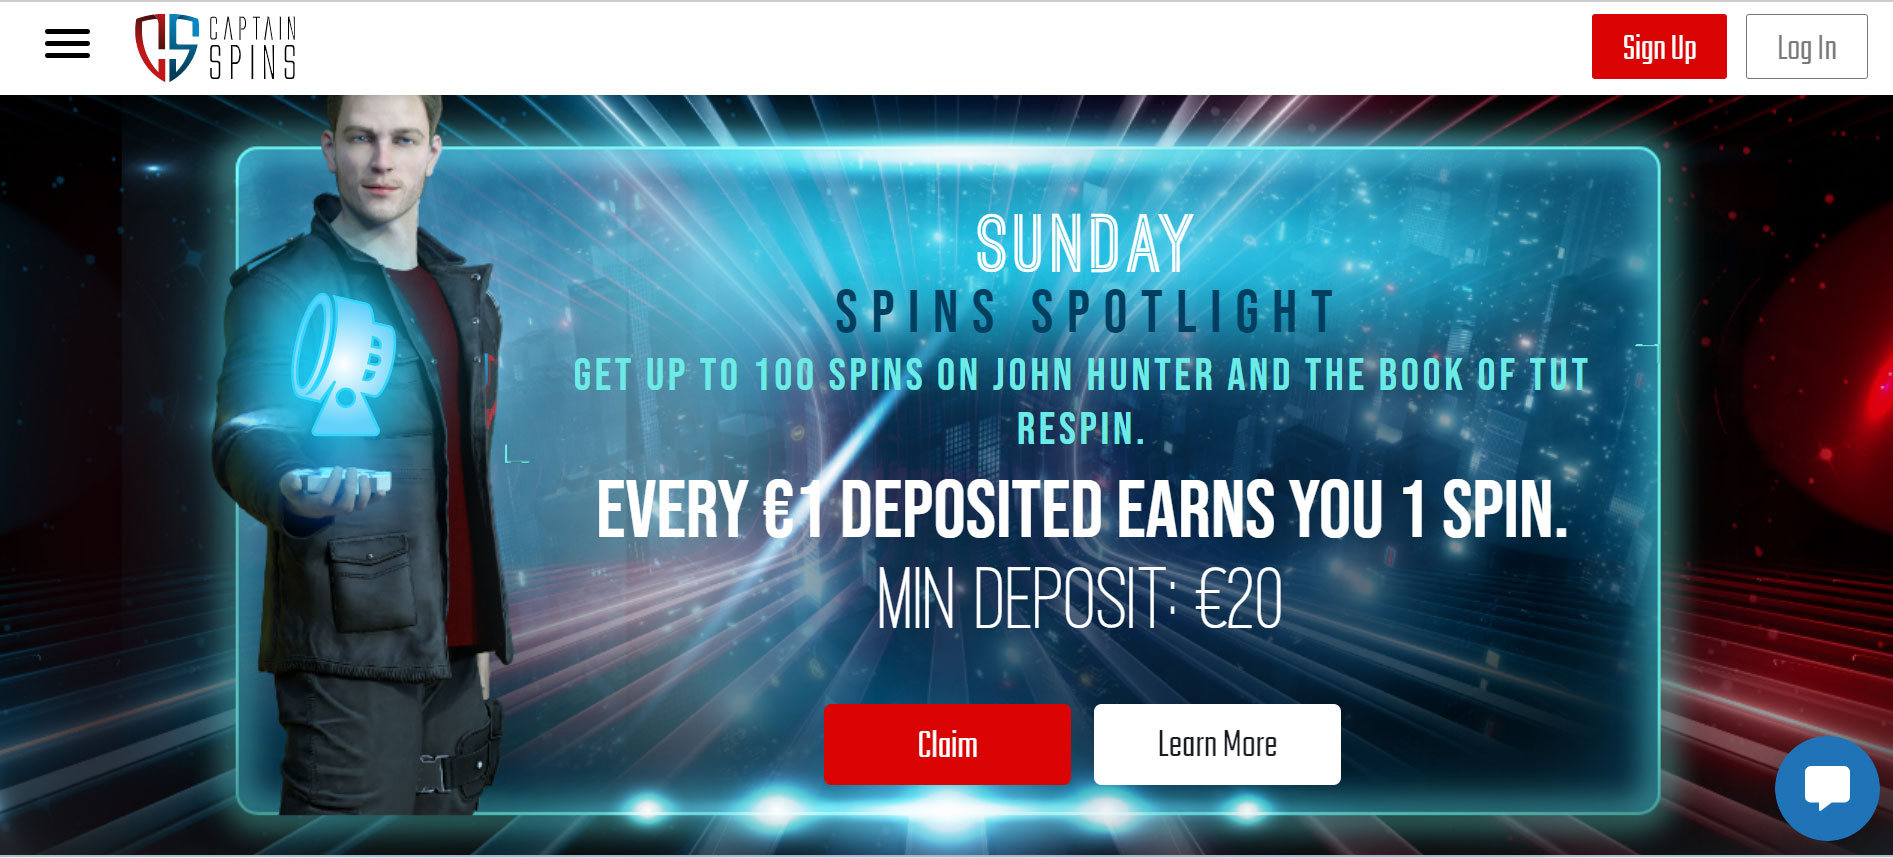 Captain Spins Casino Promotions